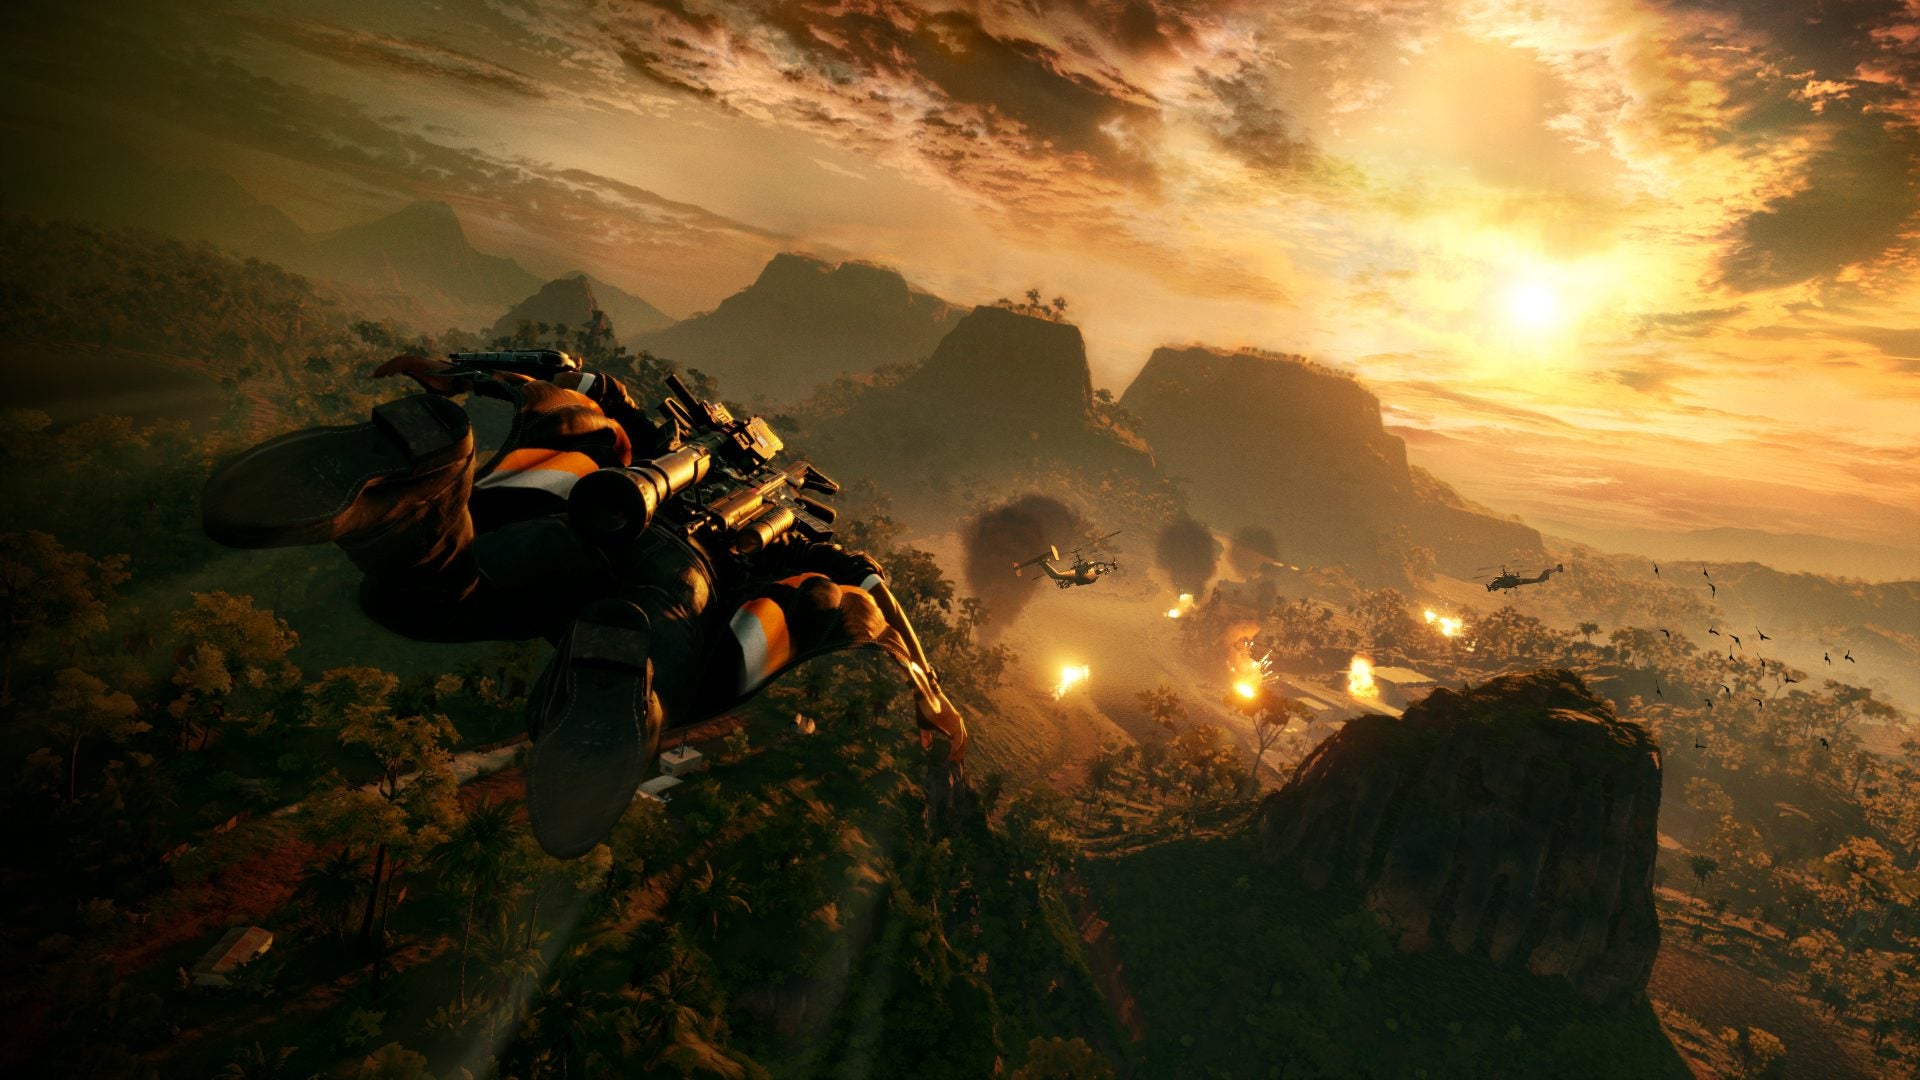 Just Cause 4 PreviewA screenshot of a scene from a game called Just Cause 4